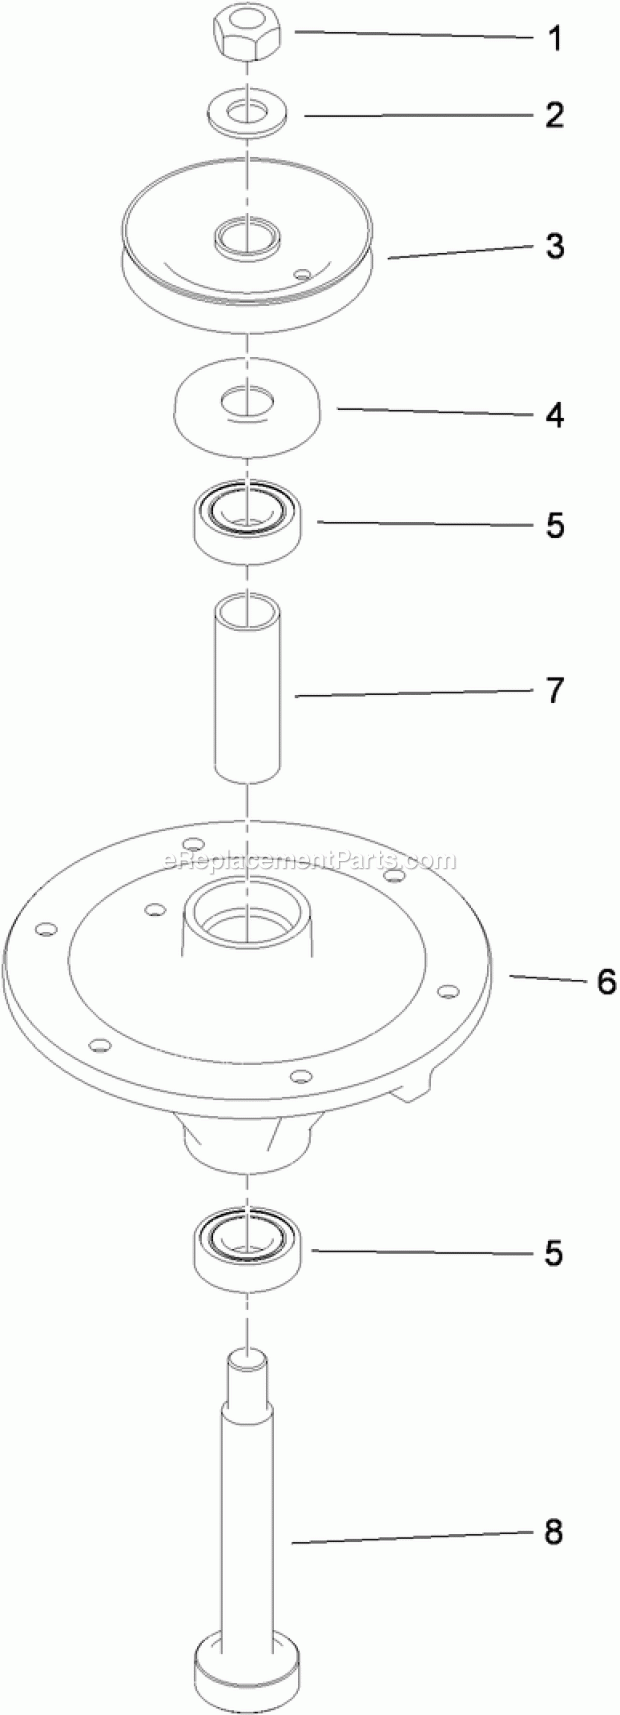 Toro 74536 (313000001-313999999) Grandstand Mower, With 40in Turbo Force Cutting Unit, 2013 Spindle Assembly No. 117-7640 Diagram